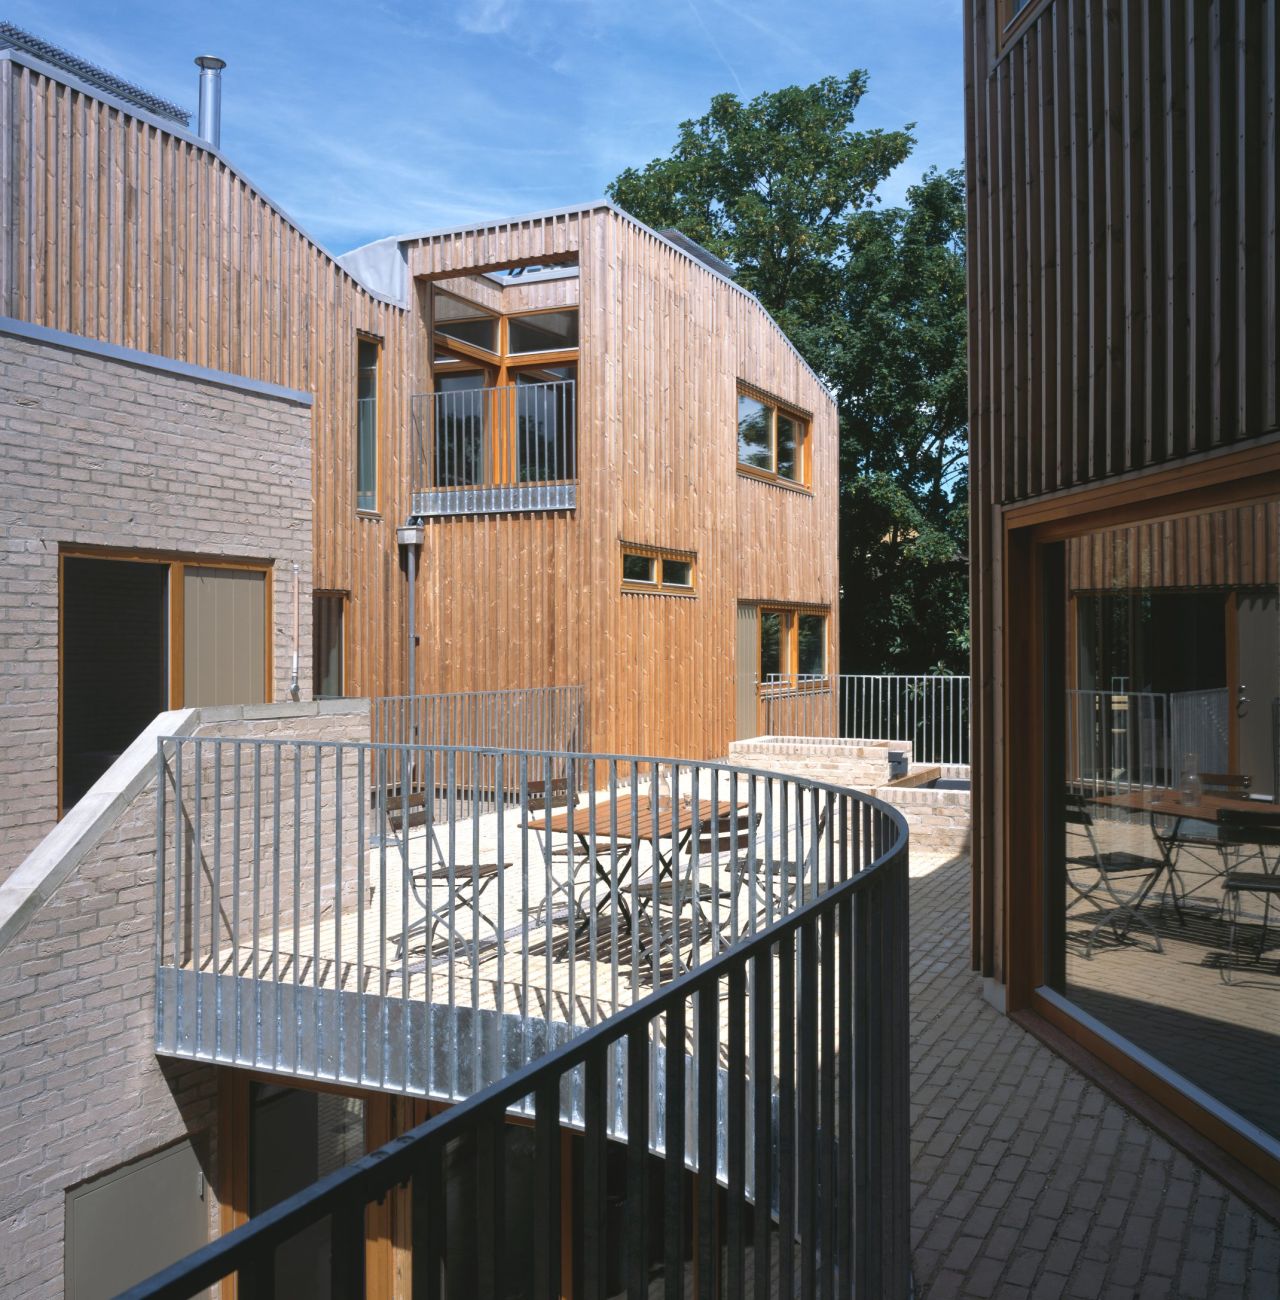 Copper Lane - London's first cohousing community, which was planned and developed by its 13 residents over several years at a cost of almost $3 million.  